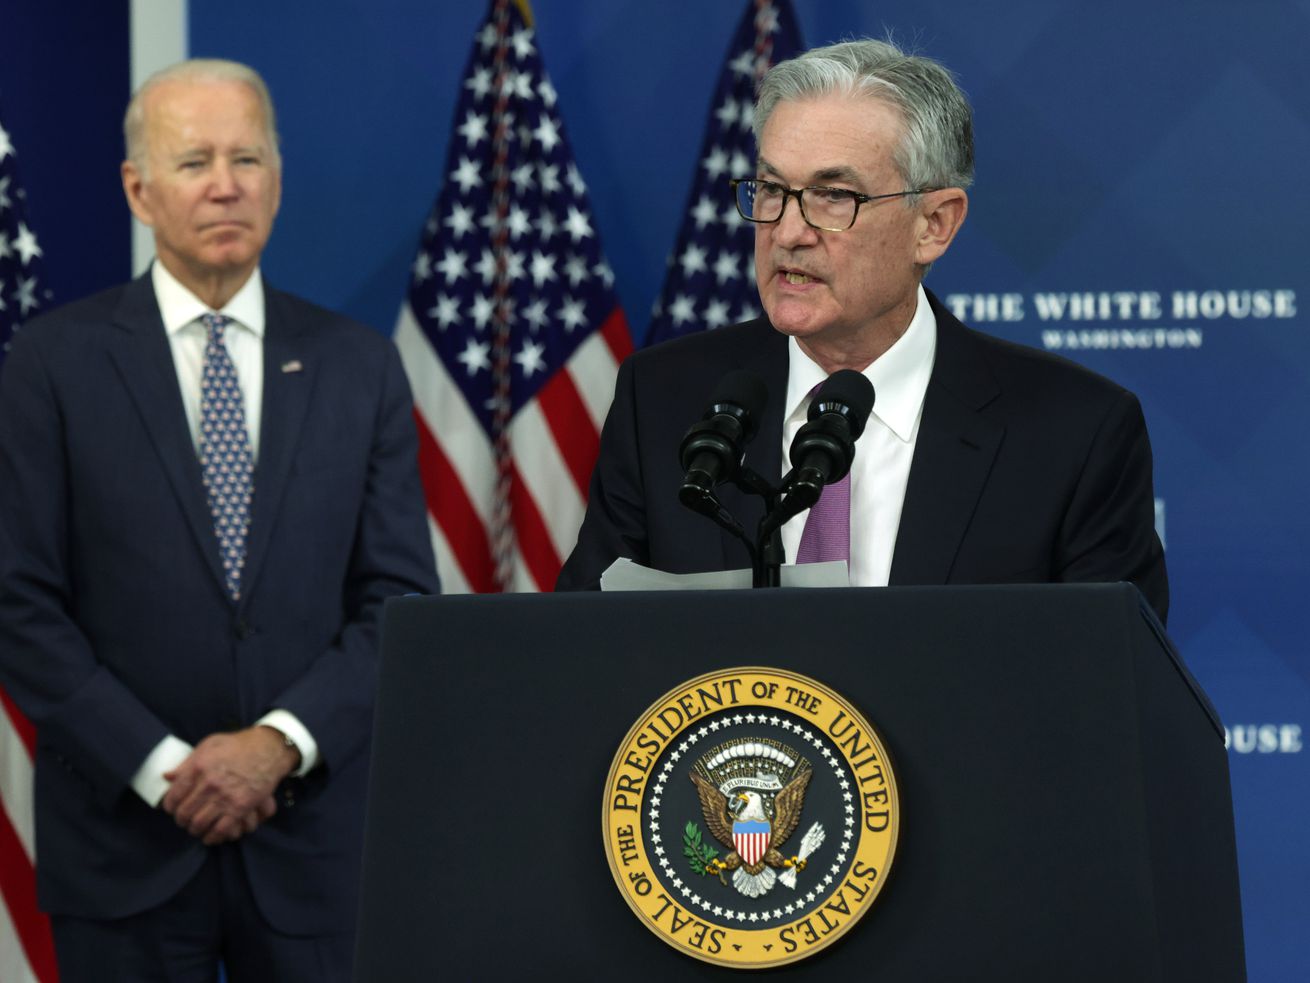 Fed chair Jerome Powell speaks from a lectern as President Joe Biden stands behind him and looks on.